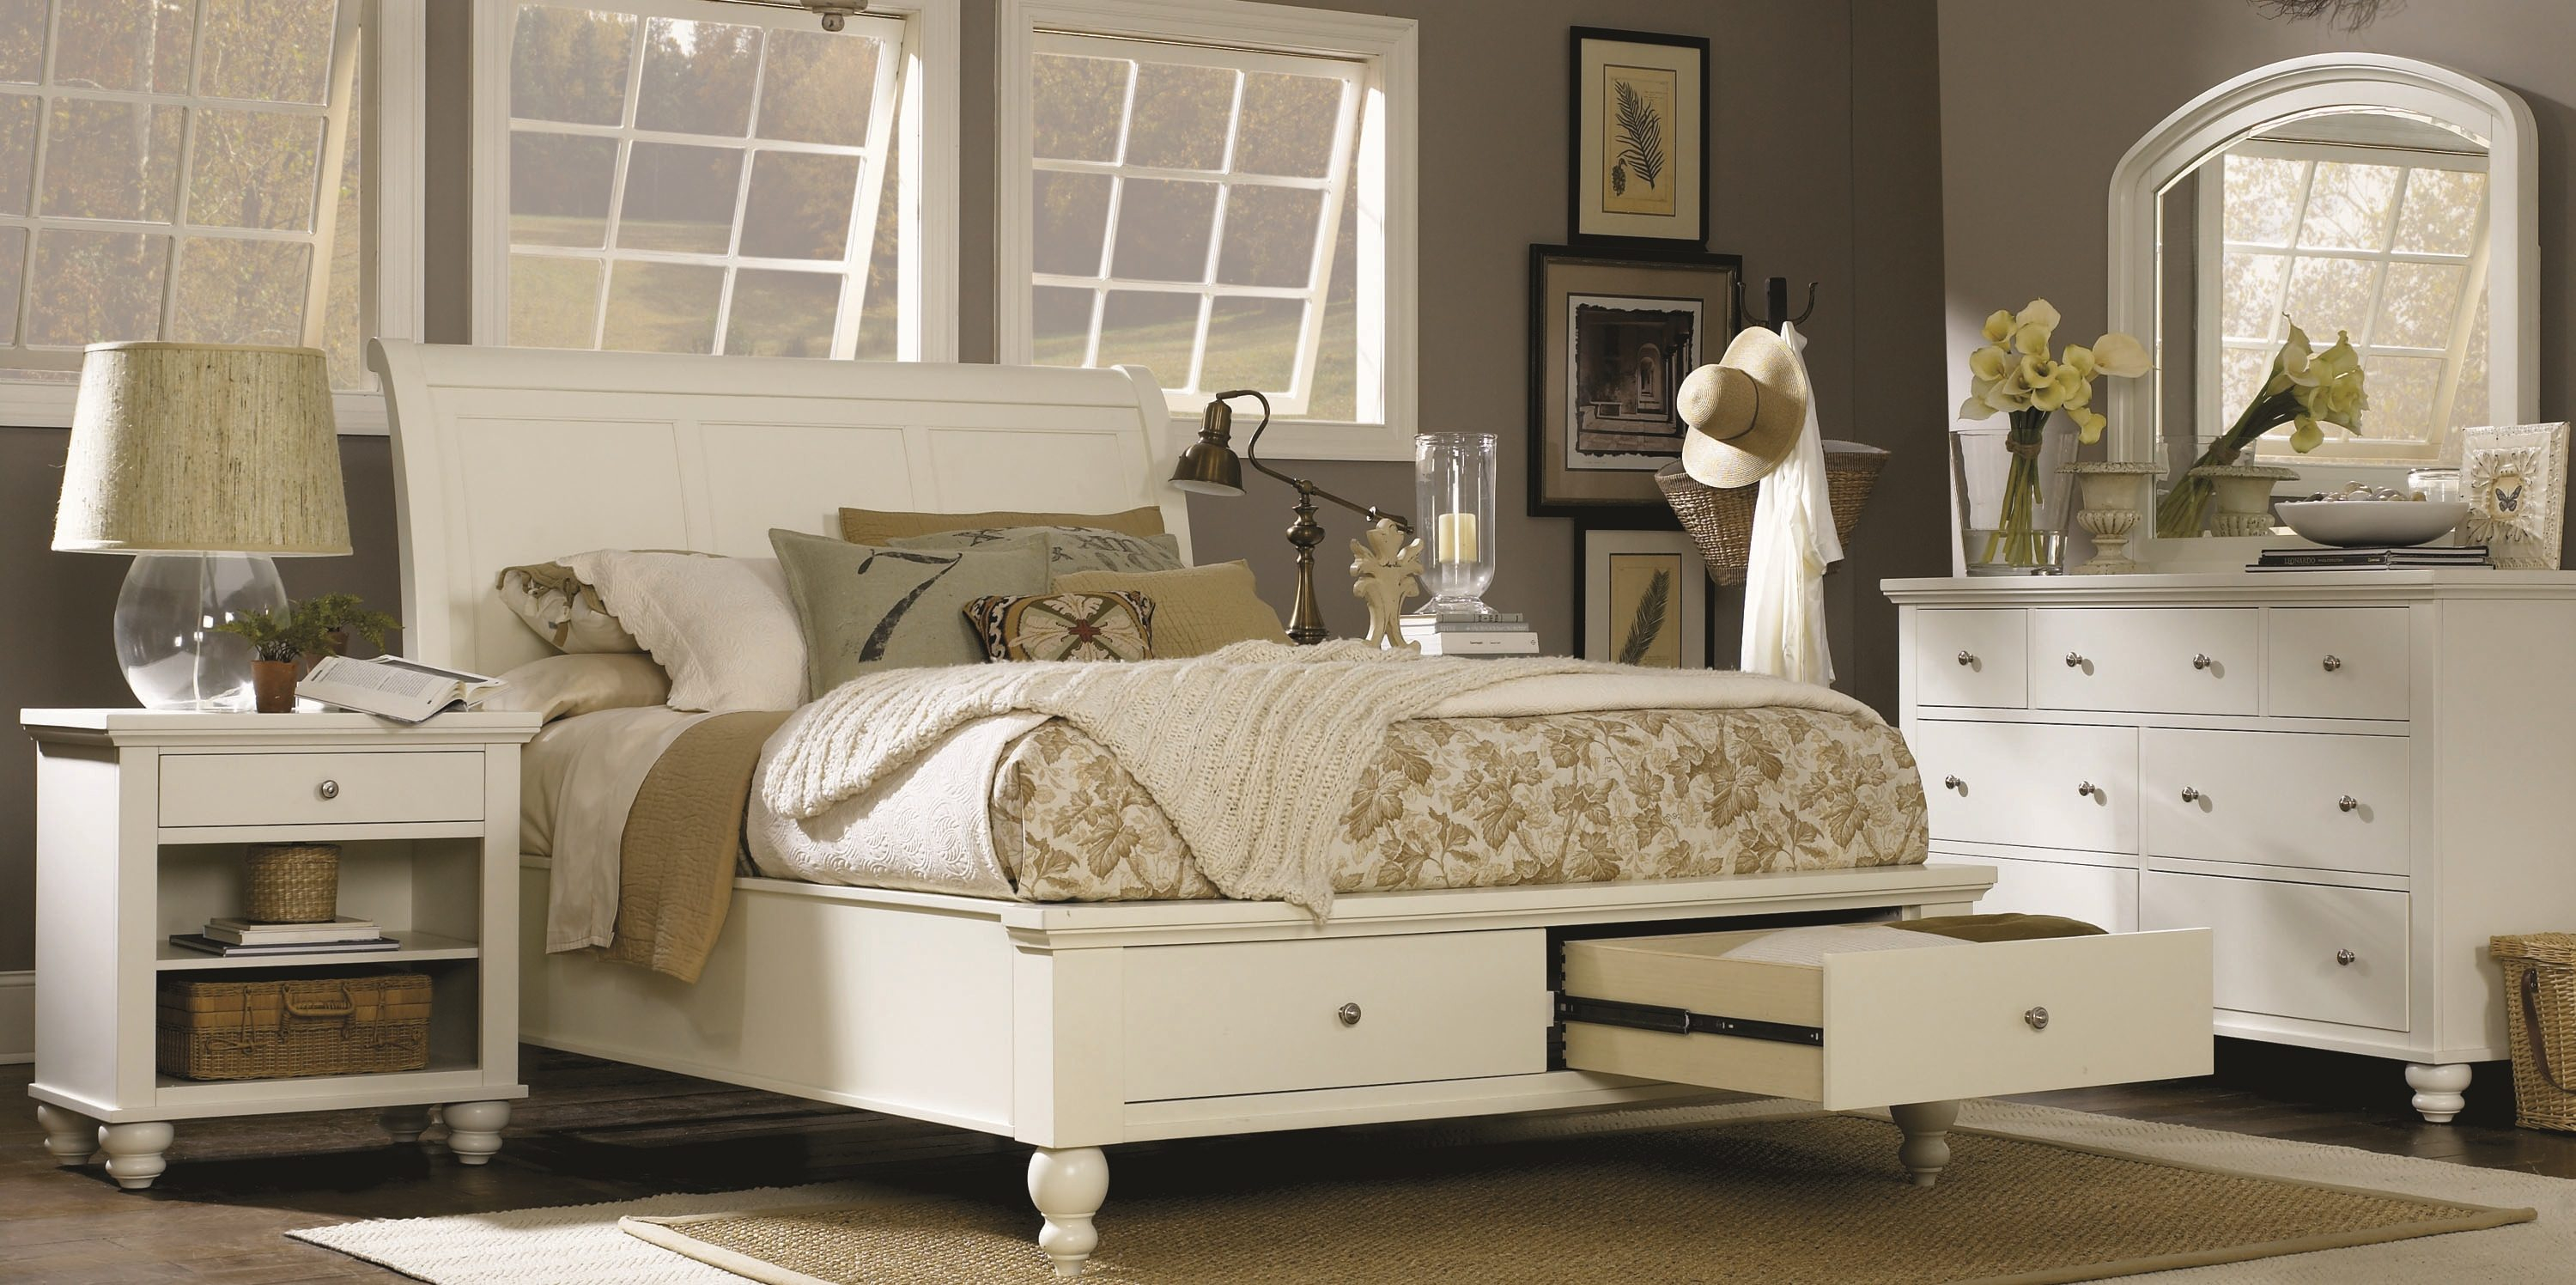 Aspenhome Cambridge Sleigh Storage Bedroom Set In Eggshell intended for measurements 3000 X 1496